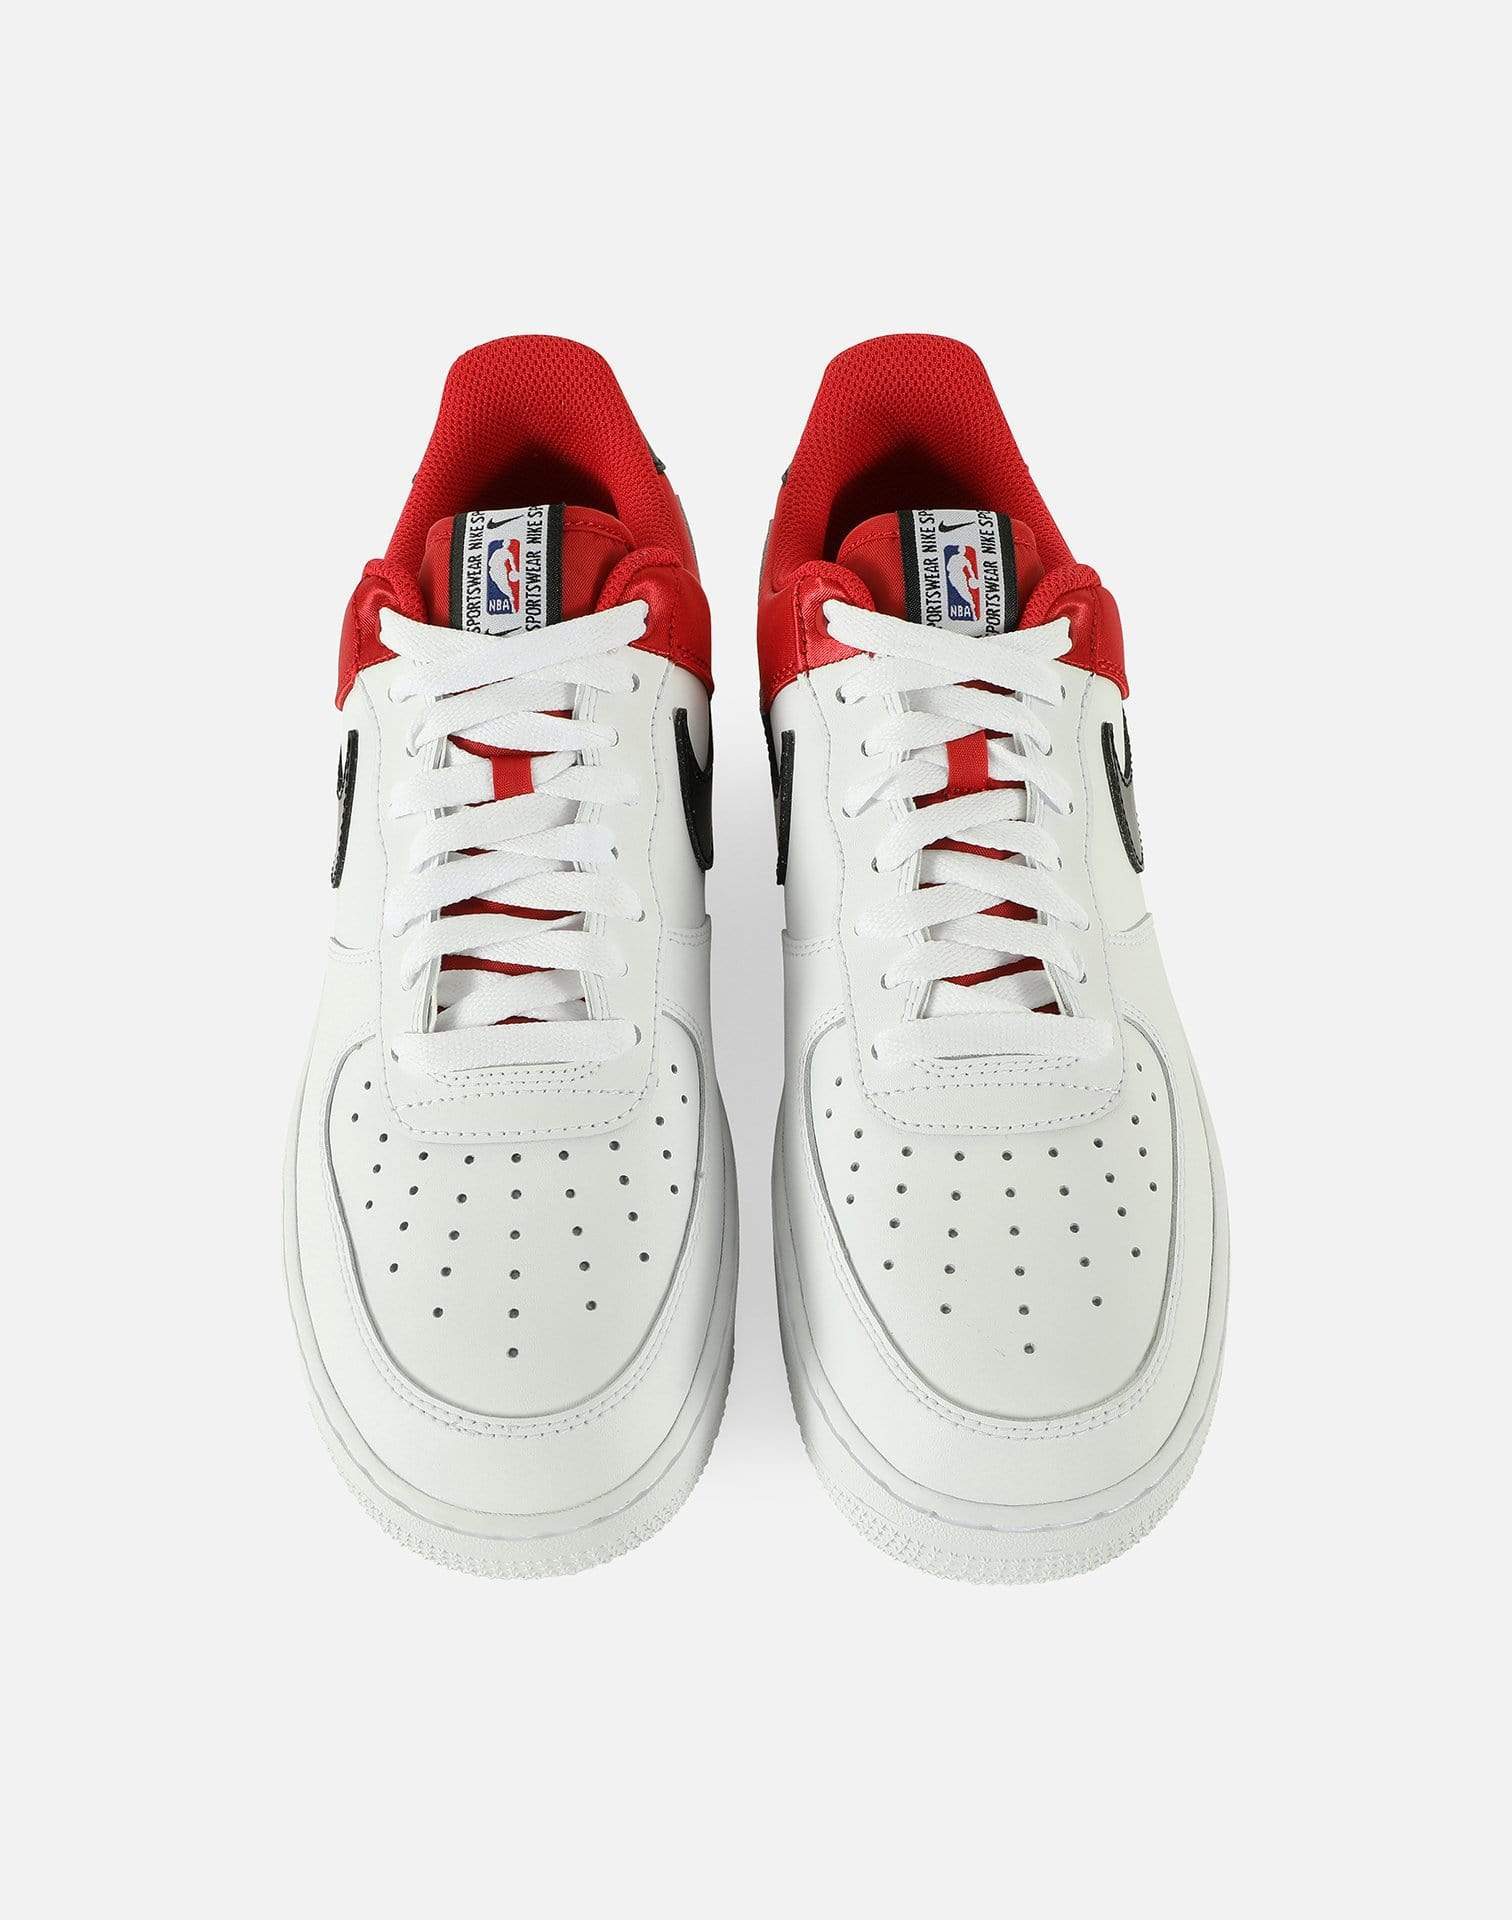 air force 1 red nba